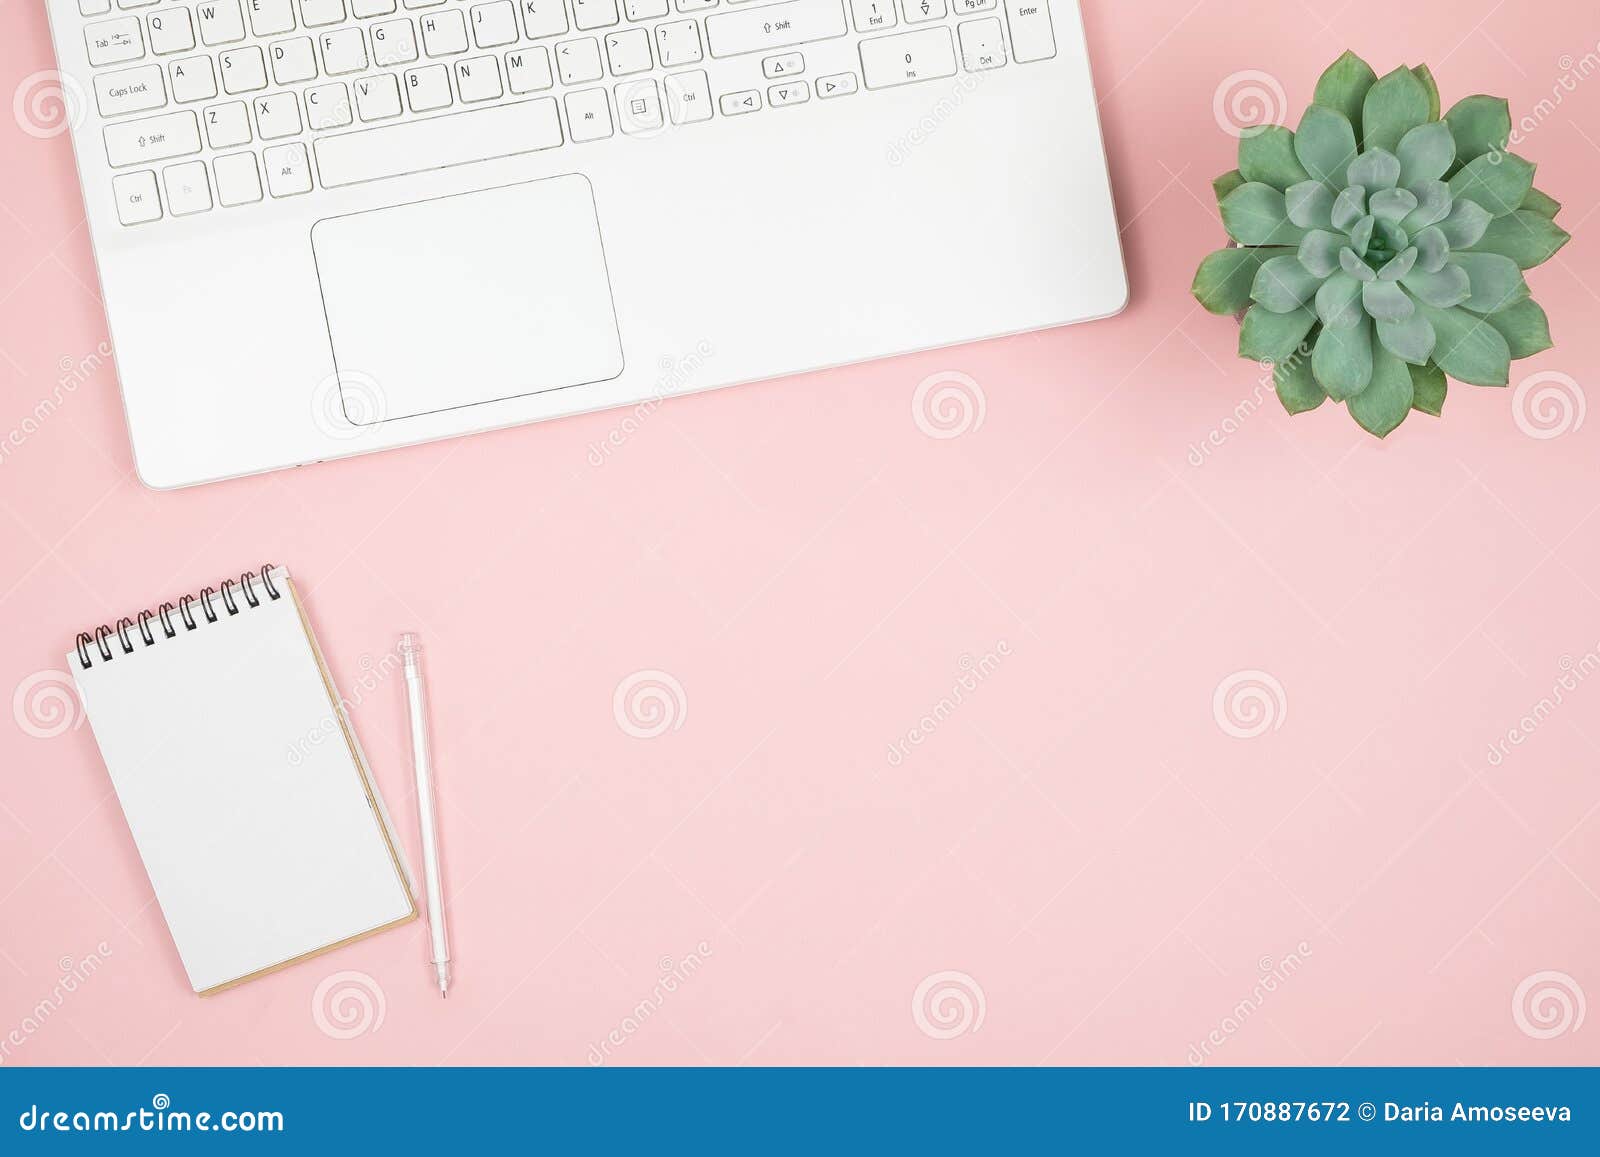 Flat Lay Home Office Desk. Women Workspace with Laptop, Notebook, Pen on  Pink Background. Top View Feminine Background. Stock Photo - Image of blog,  desk: 170887672